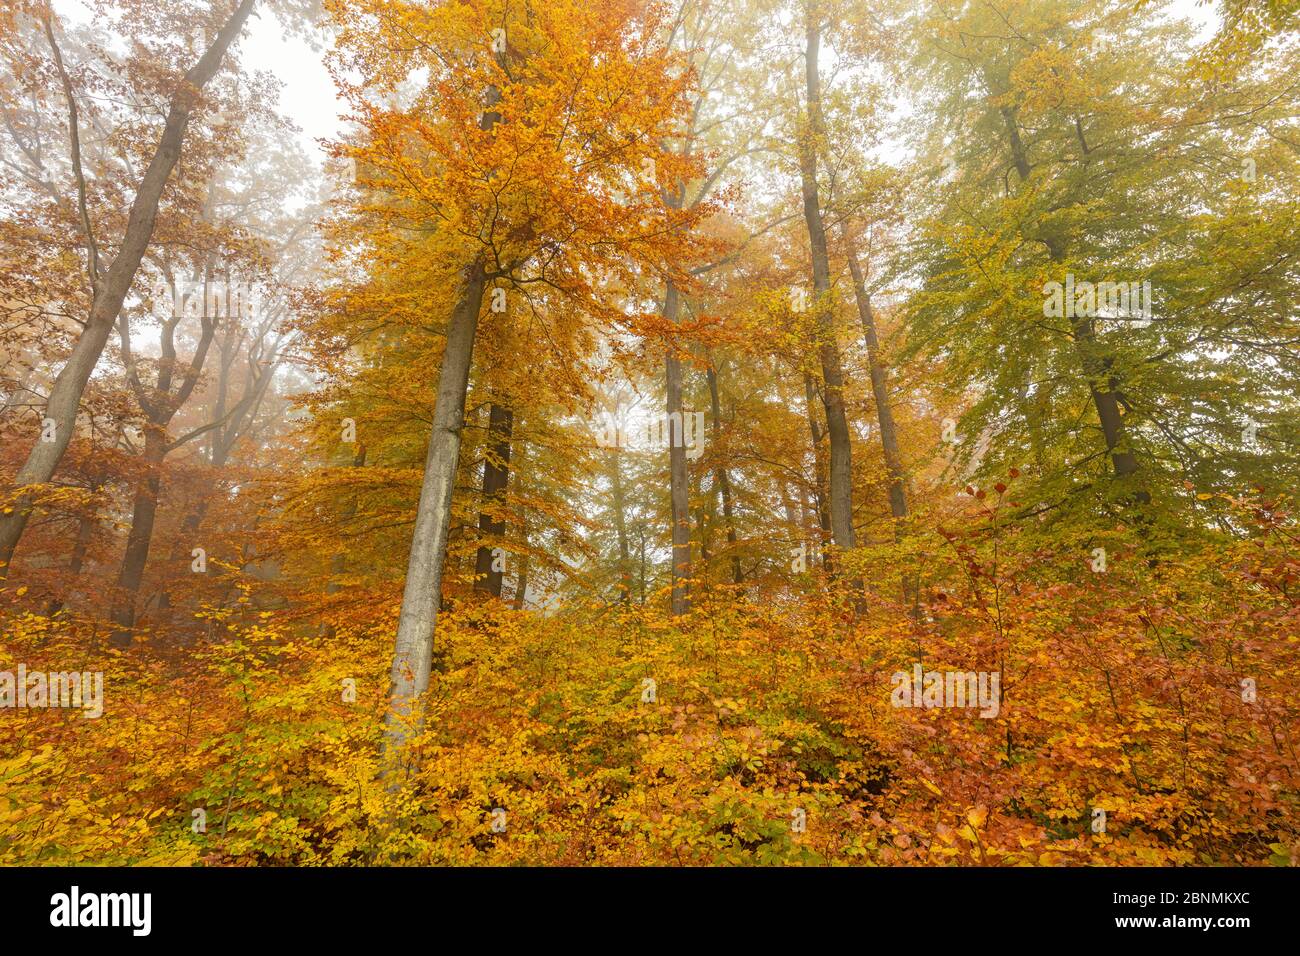 Beech (Fagus sylvatica) forest in autumn, Germany, November 2015. Stock Photo